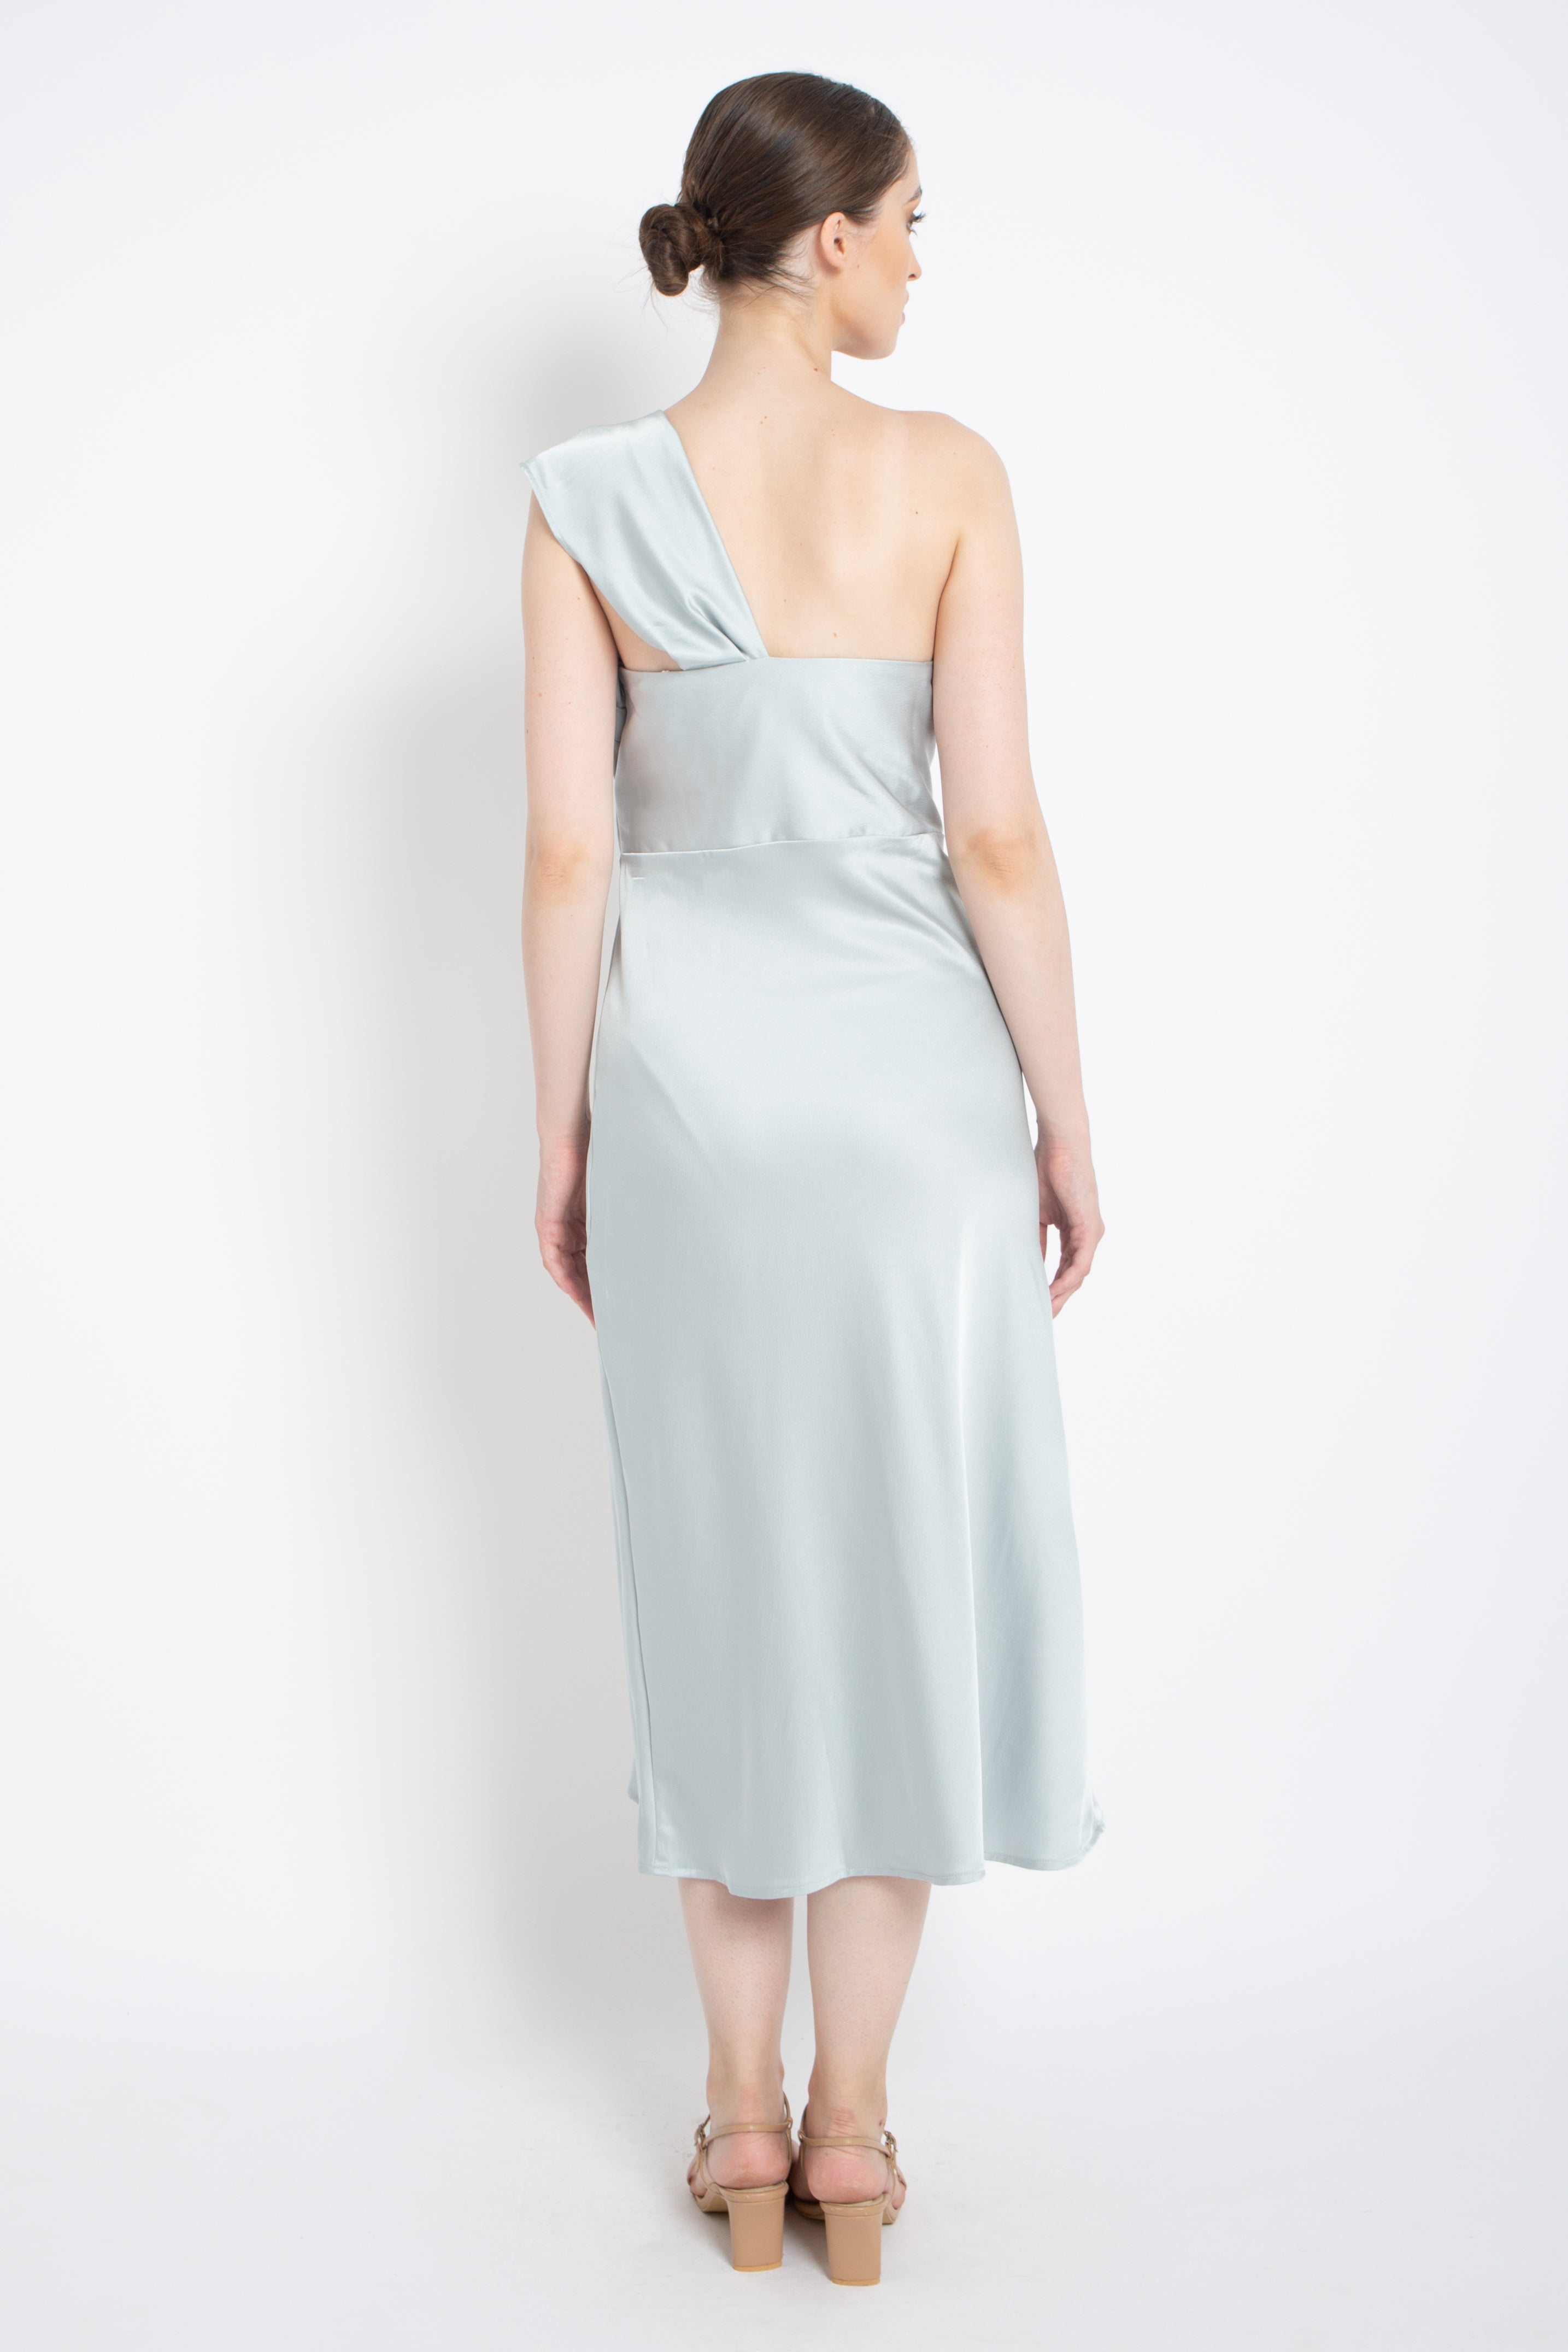 The One Sided Dress in Pastel Blue